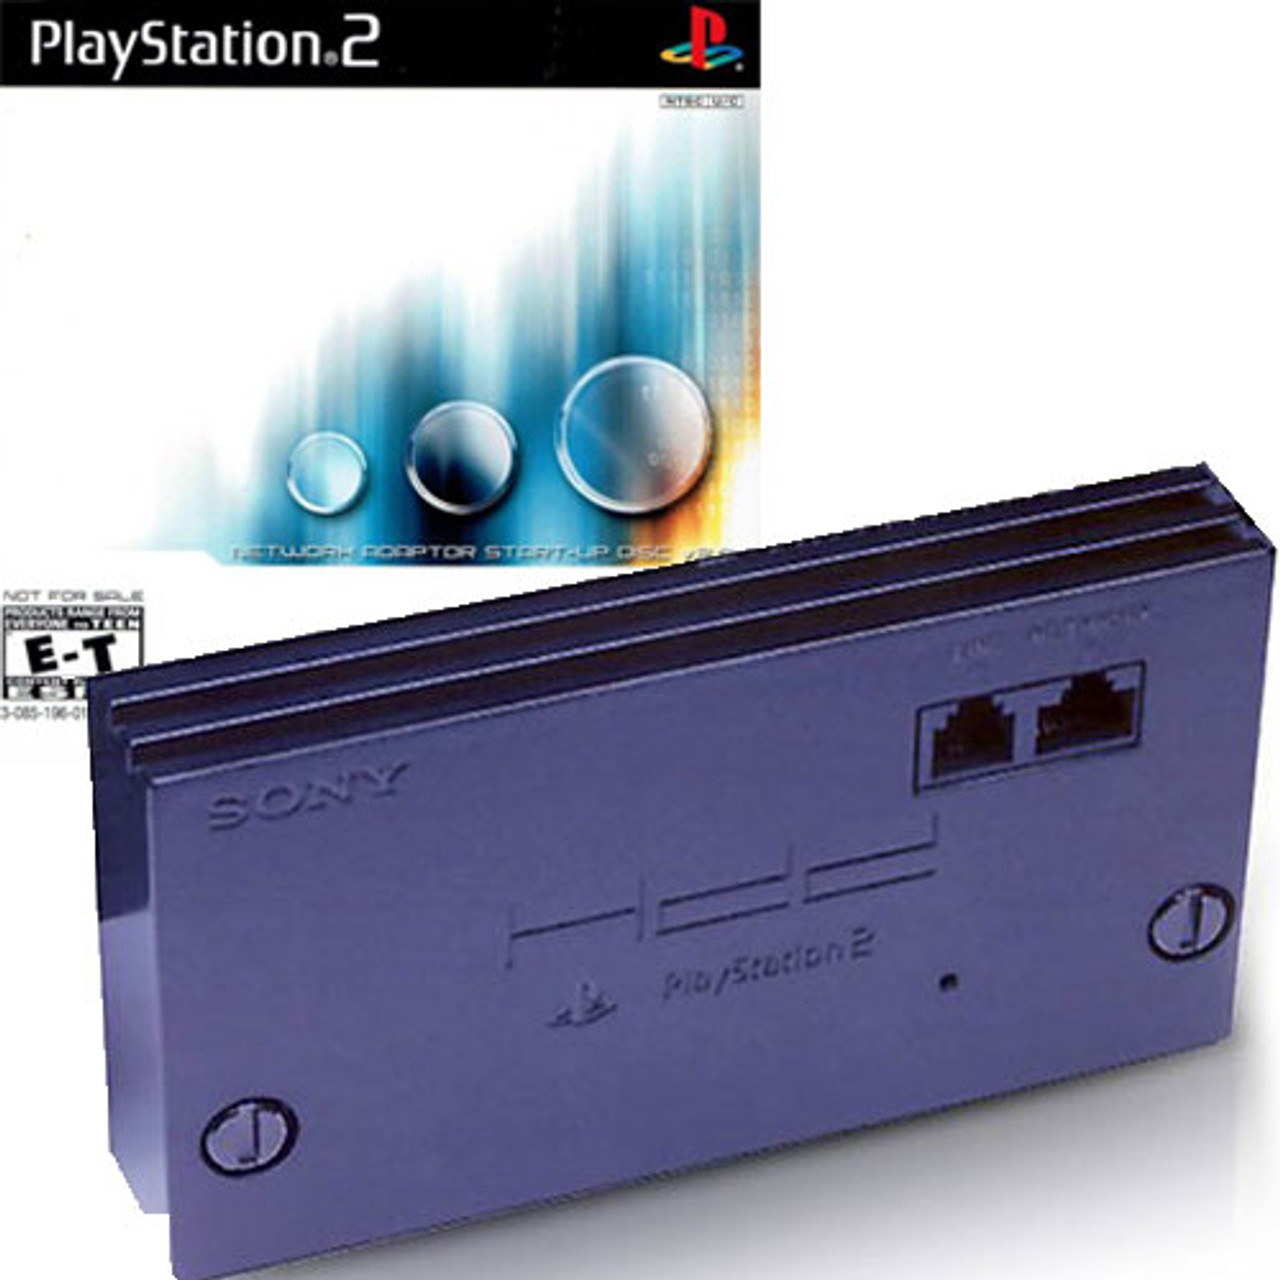 Online PS2 games with the Startup Disk Built into them 